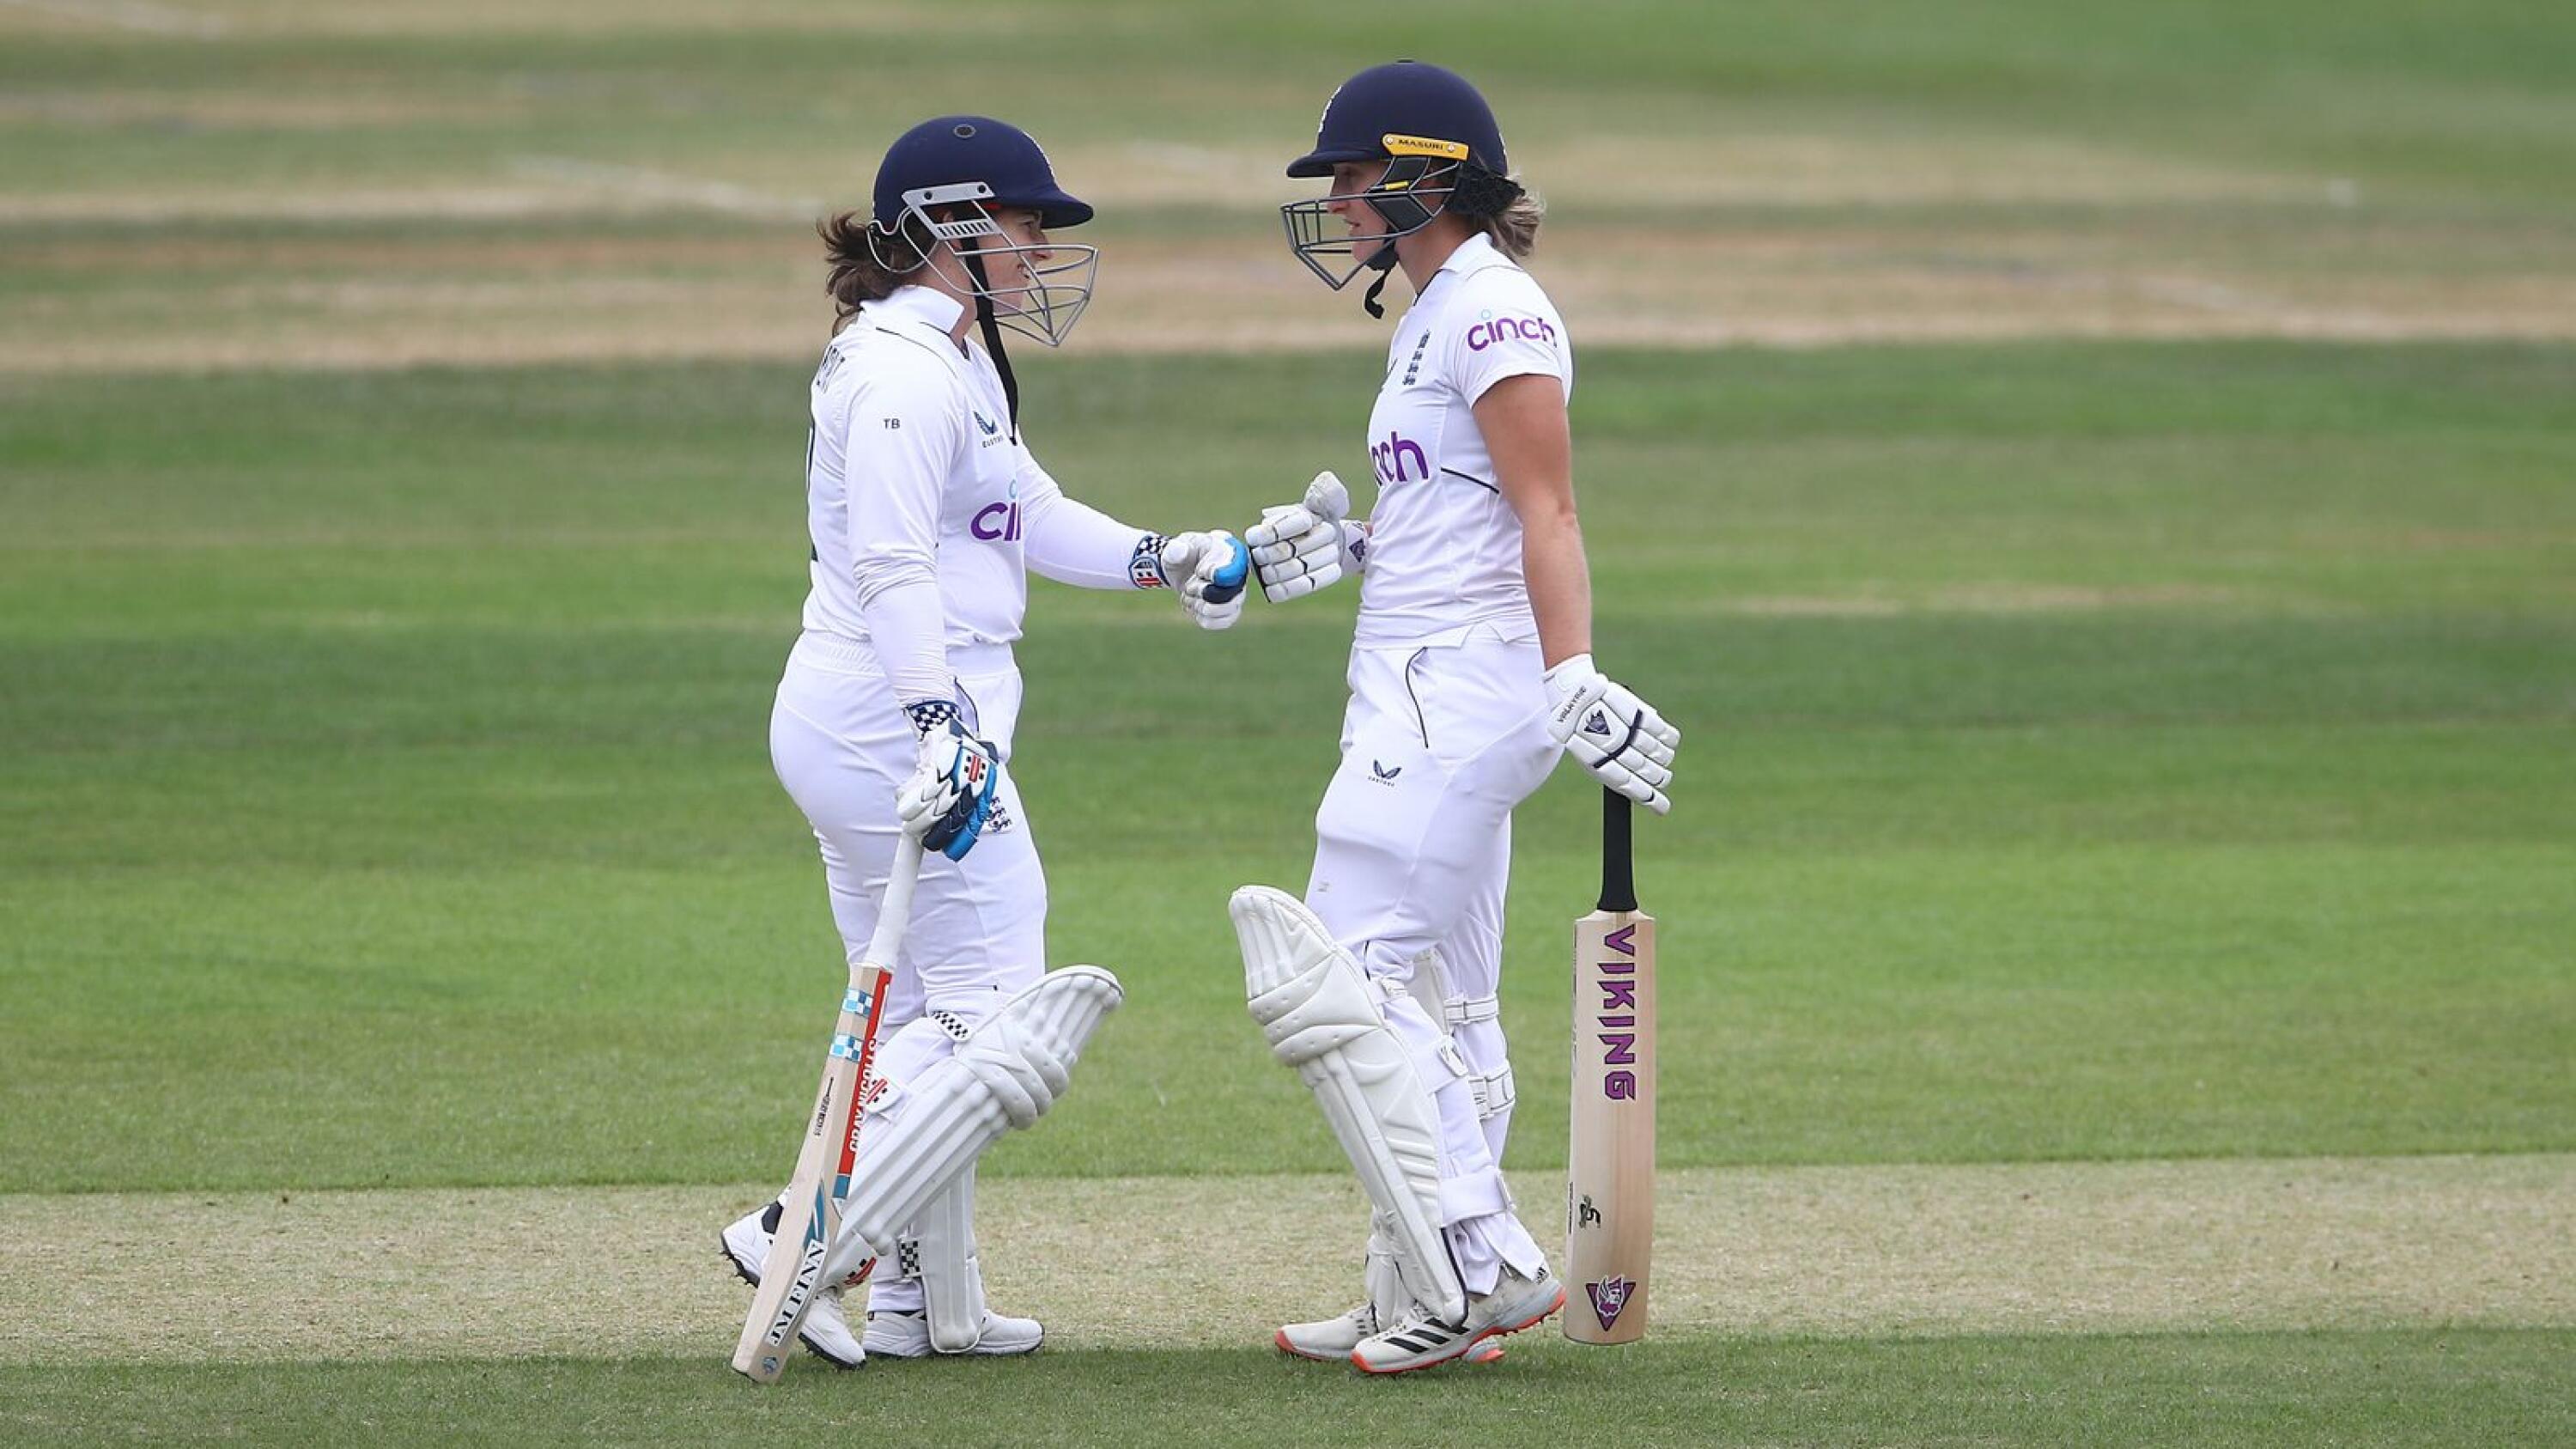 Tammy Beaumont and Emma Lamb of England bump fists during play on day two of their Test match against South Africa at Cooper Associates County Ground, Taunton, on Tuesday